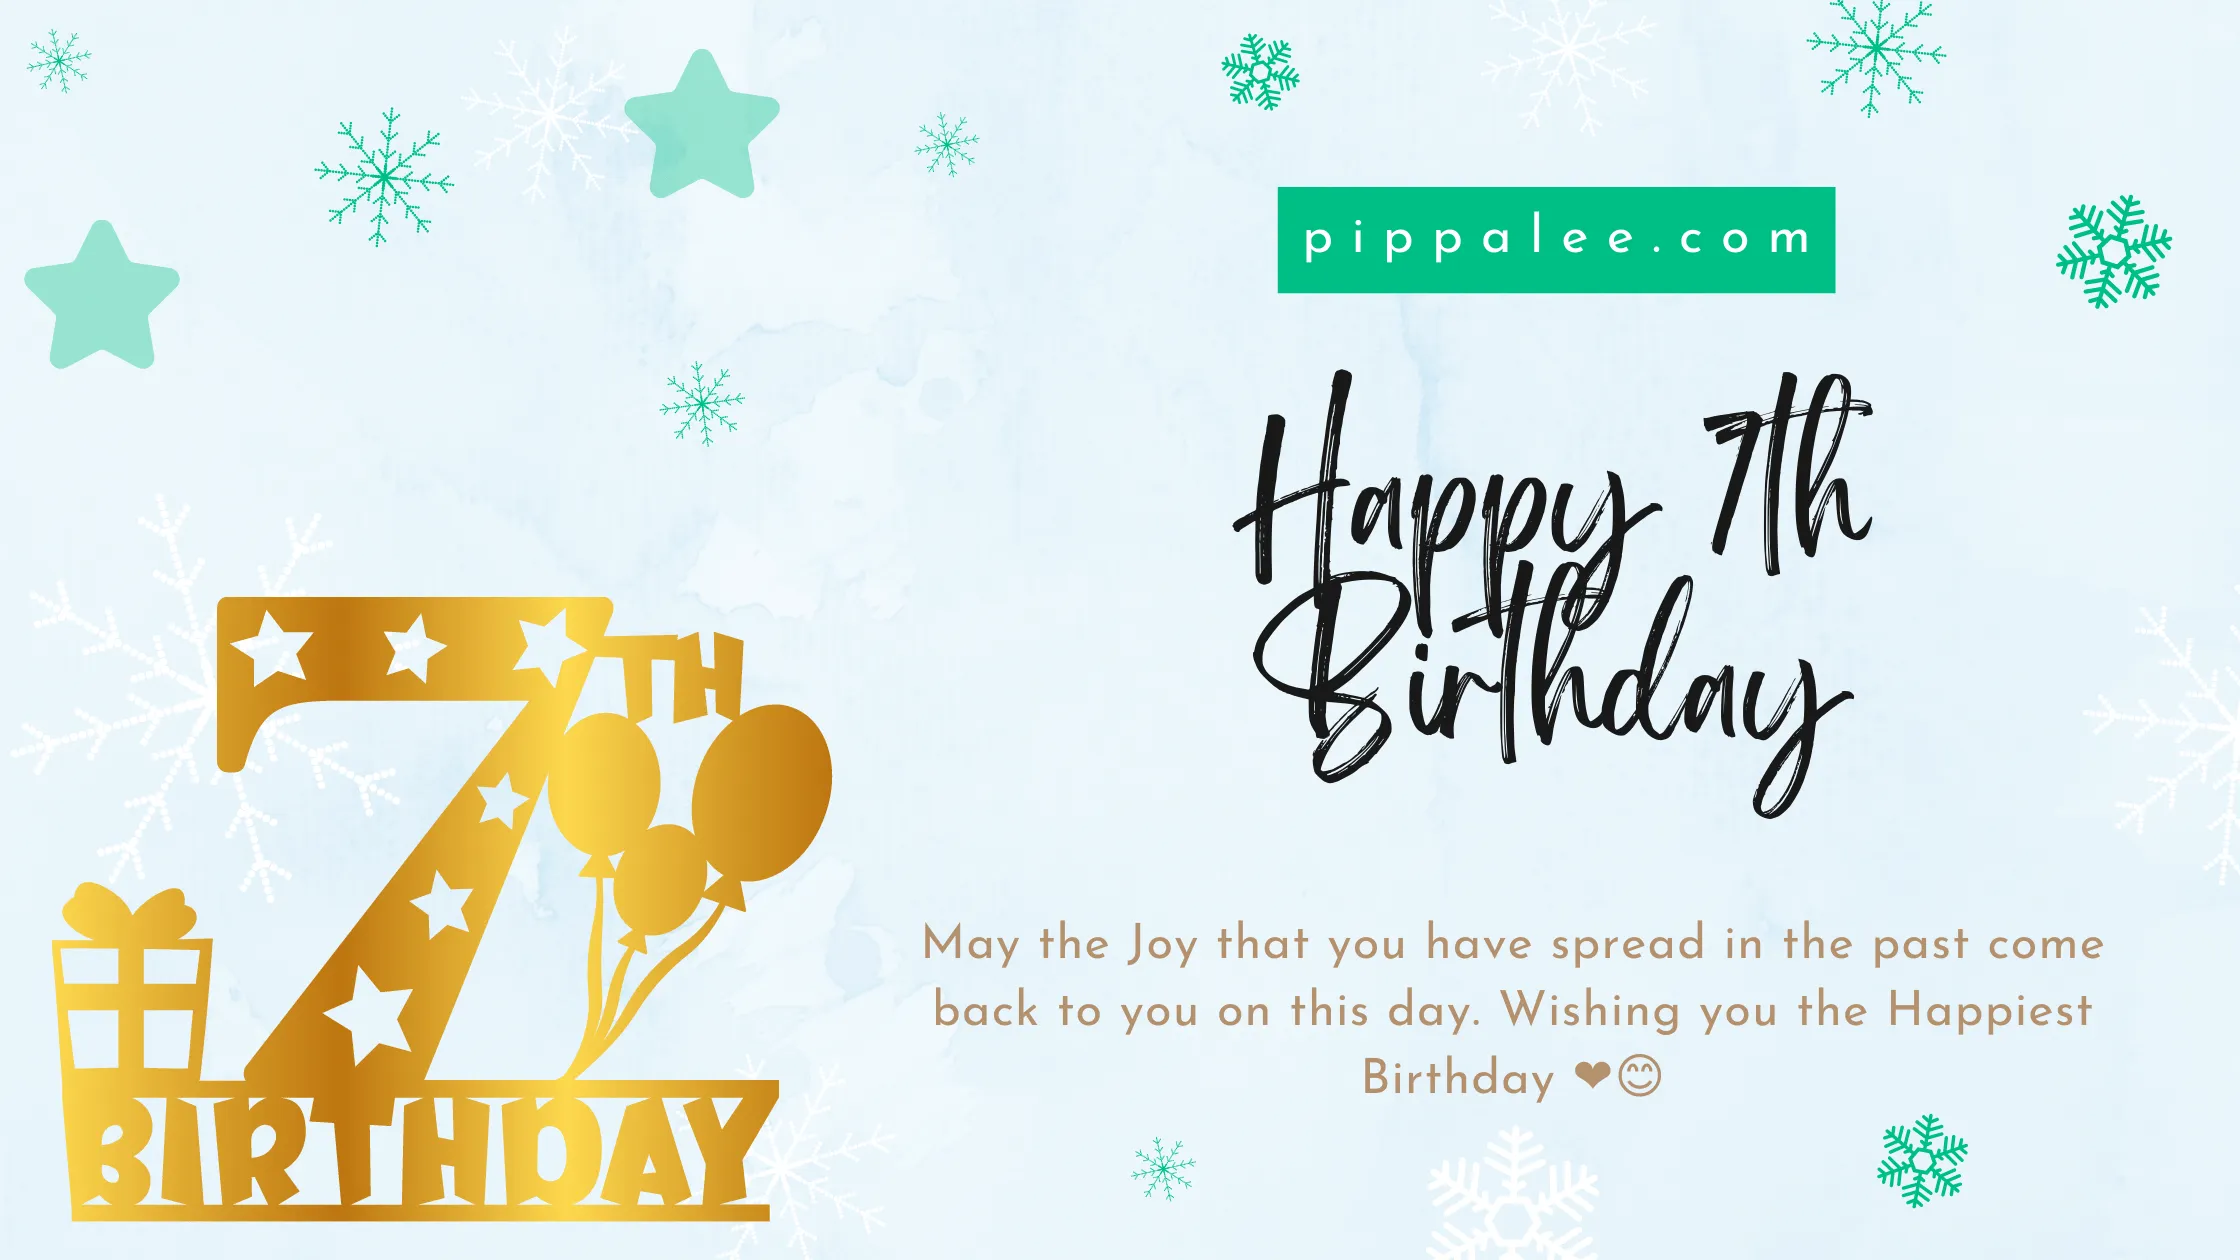 Happy 7th Birthday - Wishes & Messages